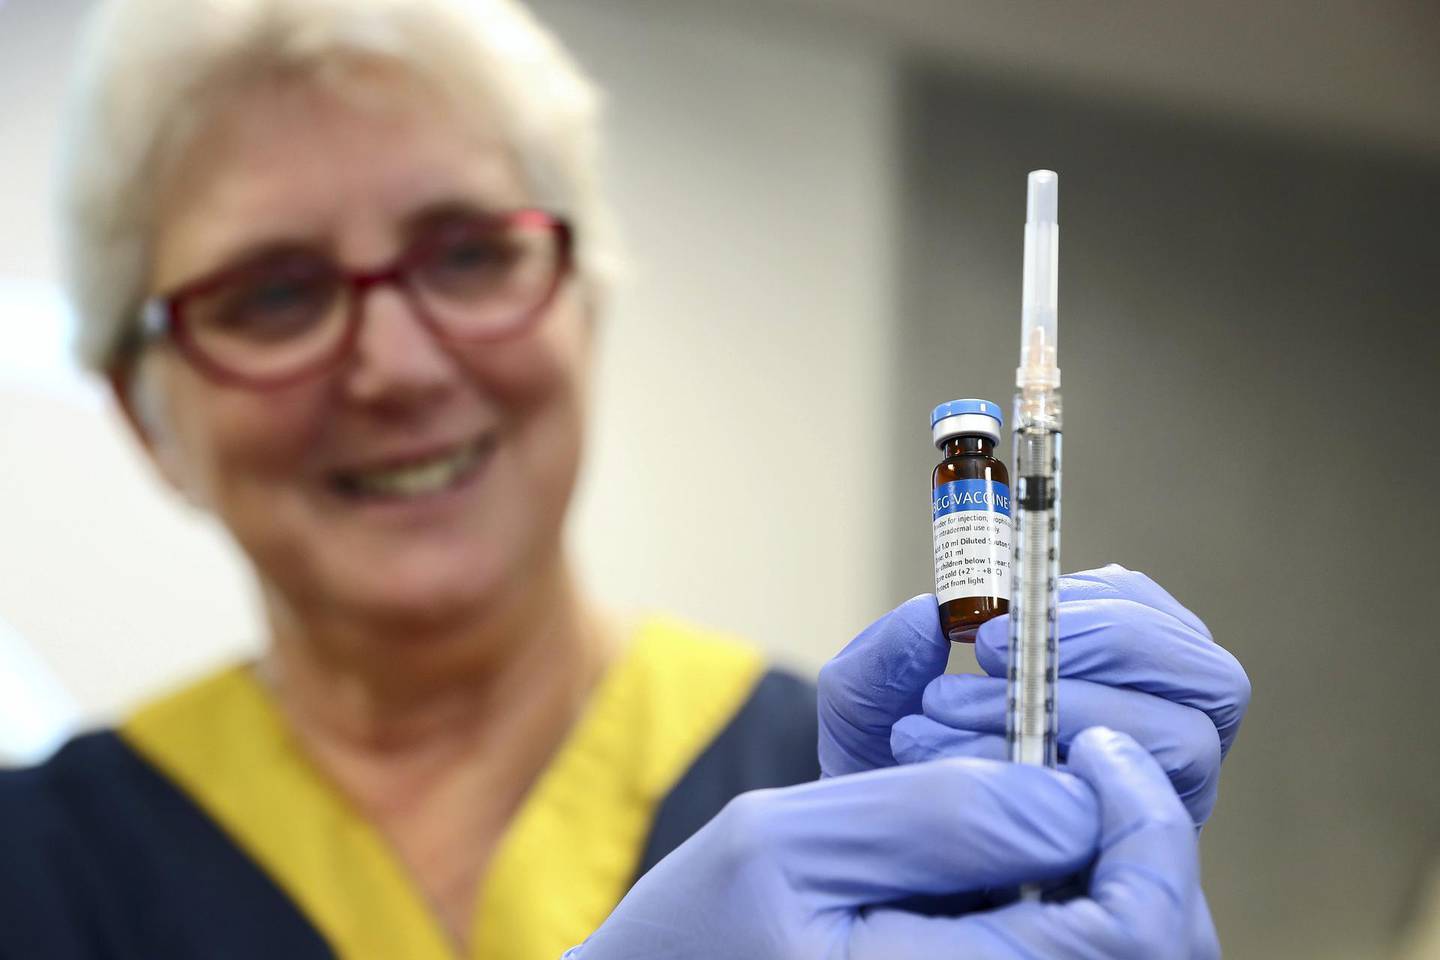 PERTH, AUSTRALIA - APRIL 20: A clinical staff member holds a BCG vial and syringe in the trial clinic at Sir Charles Gairdner hospital on April 20, 2020 in Perth, Australia. Healthcare workers in Western Australia are participating in a new trial to test whether an existing tuberculosis vaccine can help reduce their chances of contracting COVID-19. 2000 frontline staff from Fiona Stanley, Sir Charles Gairdner and Perth Children's Hospital are taking part in the research trial, which will see half of participants receiving the existing Bacillus Calmette-GuÃ©rin (BCG) vaccine in addition to their flu vaccine, while the other half receive the regular flu shot. The BCG vaccine was originally developed to work against tuberculosis, but it is hoped it might help reduce the chance of contracting coronavirus as well as lessen the severity of symptoms and boost immunity in the long term. The BRACE trial is being led by by the Murdoch Children's Research Institute. (Photo by Paul Kane/Getty Images)